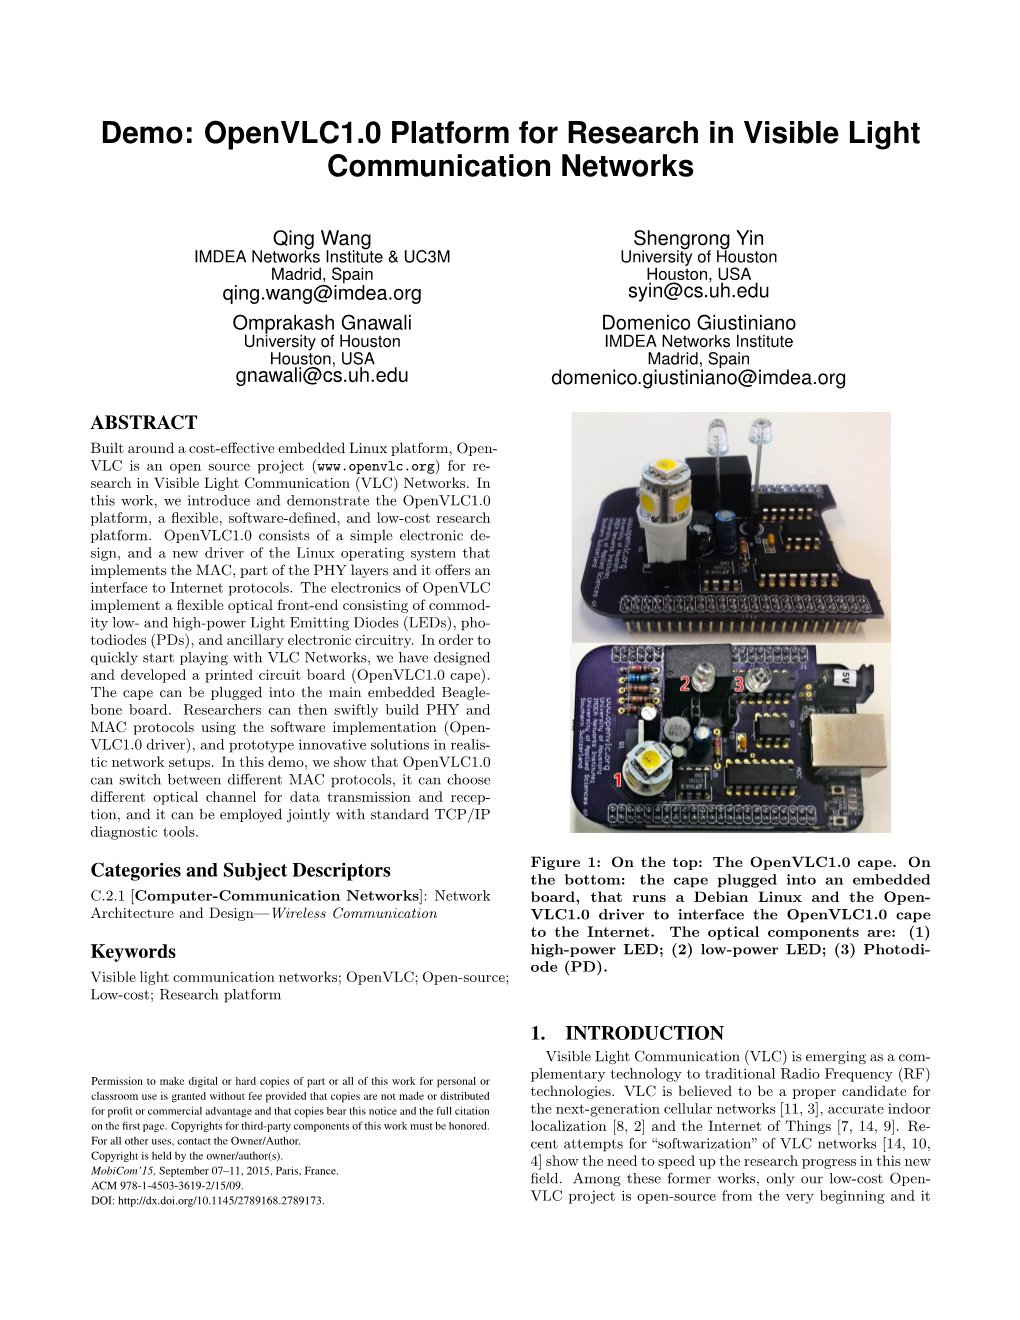 Openvlc1.0 Platform for Research in Visible Light Communication Networks